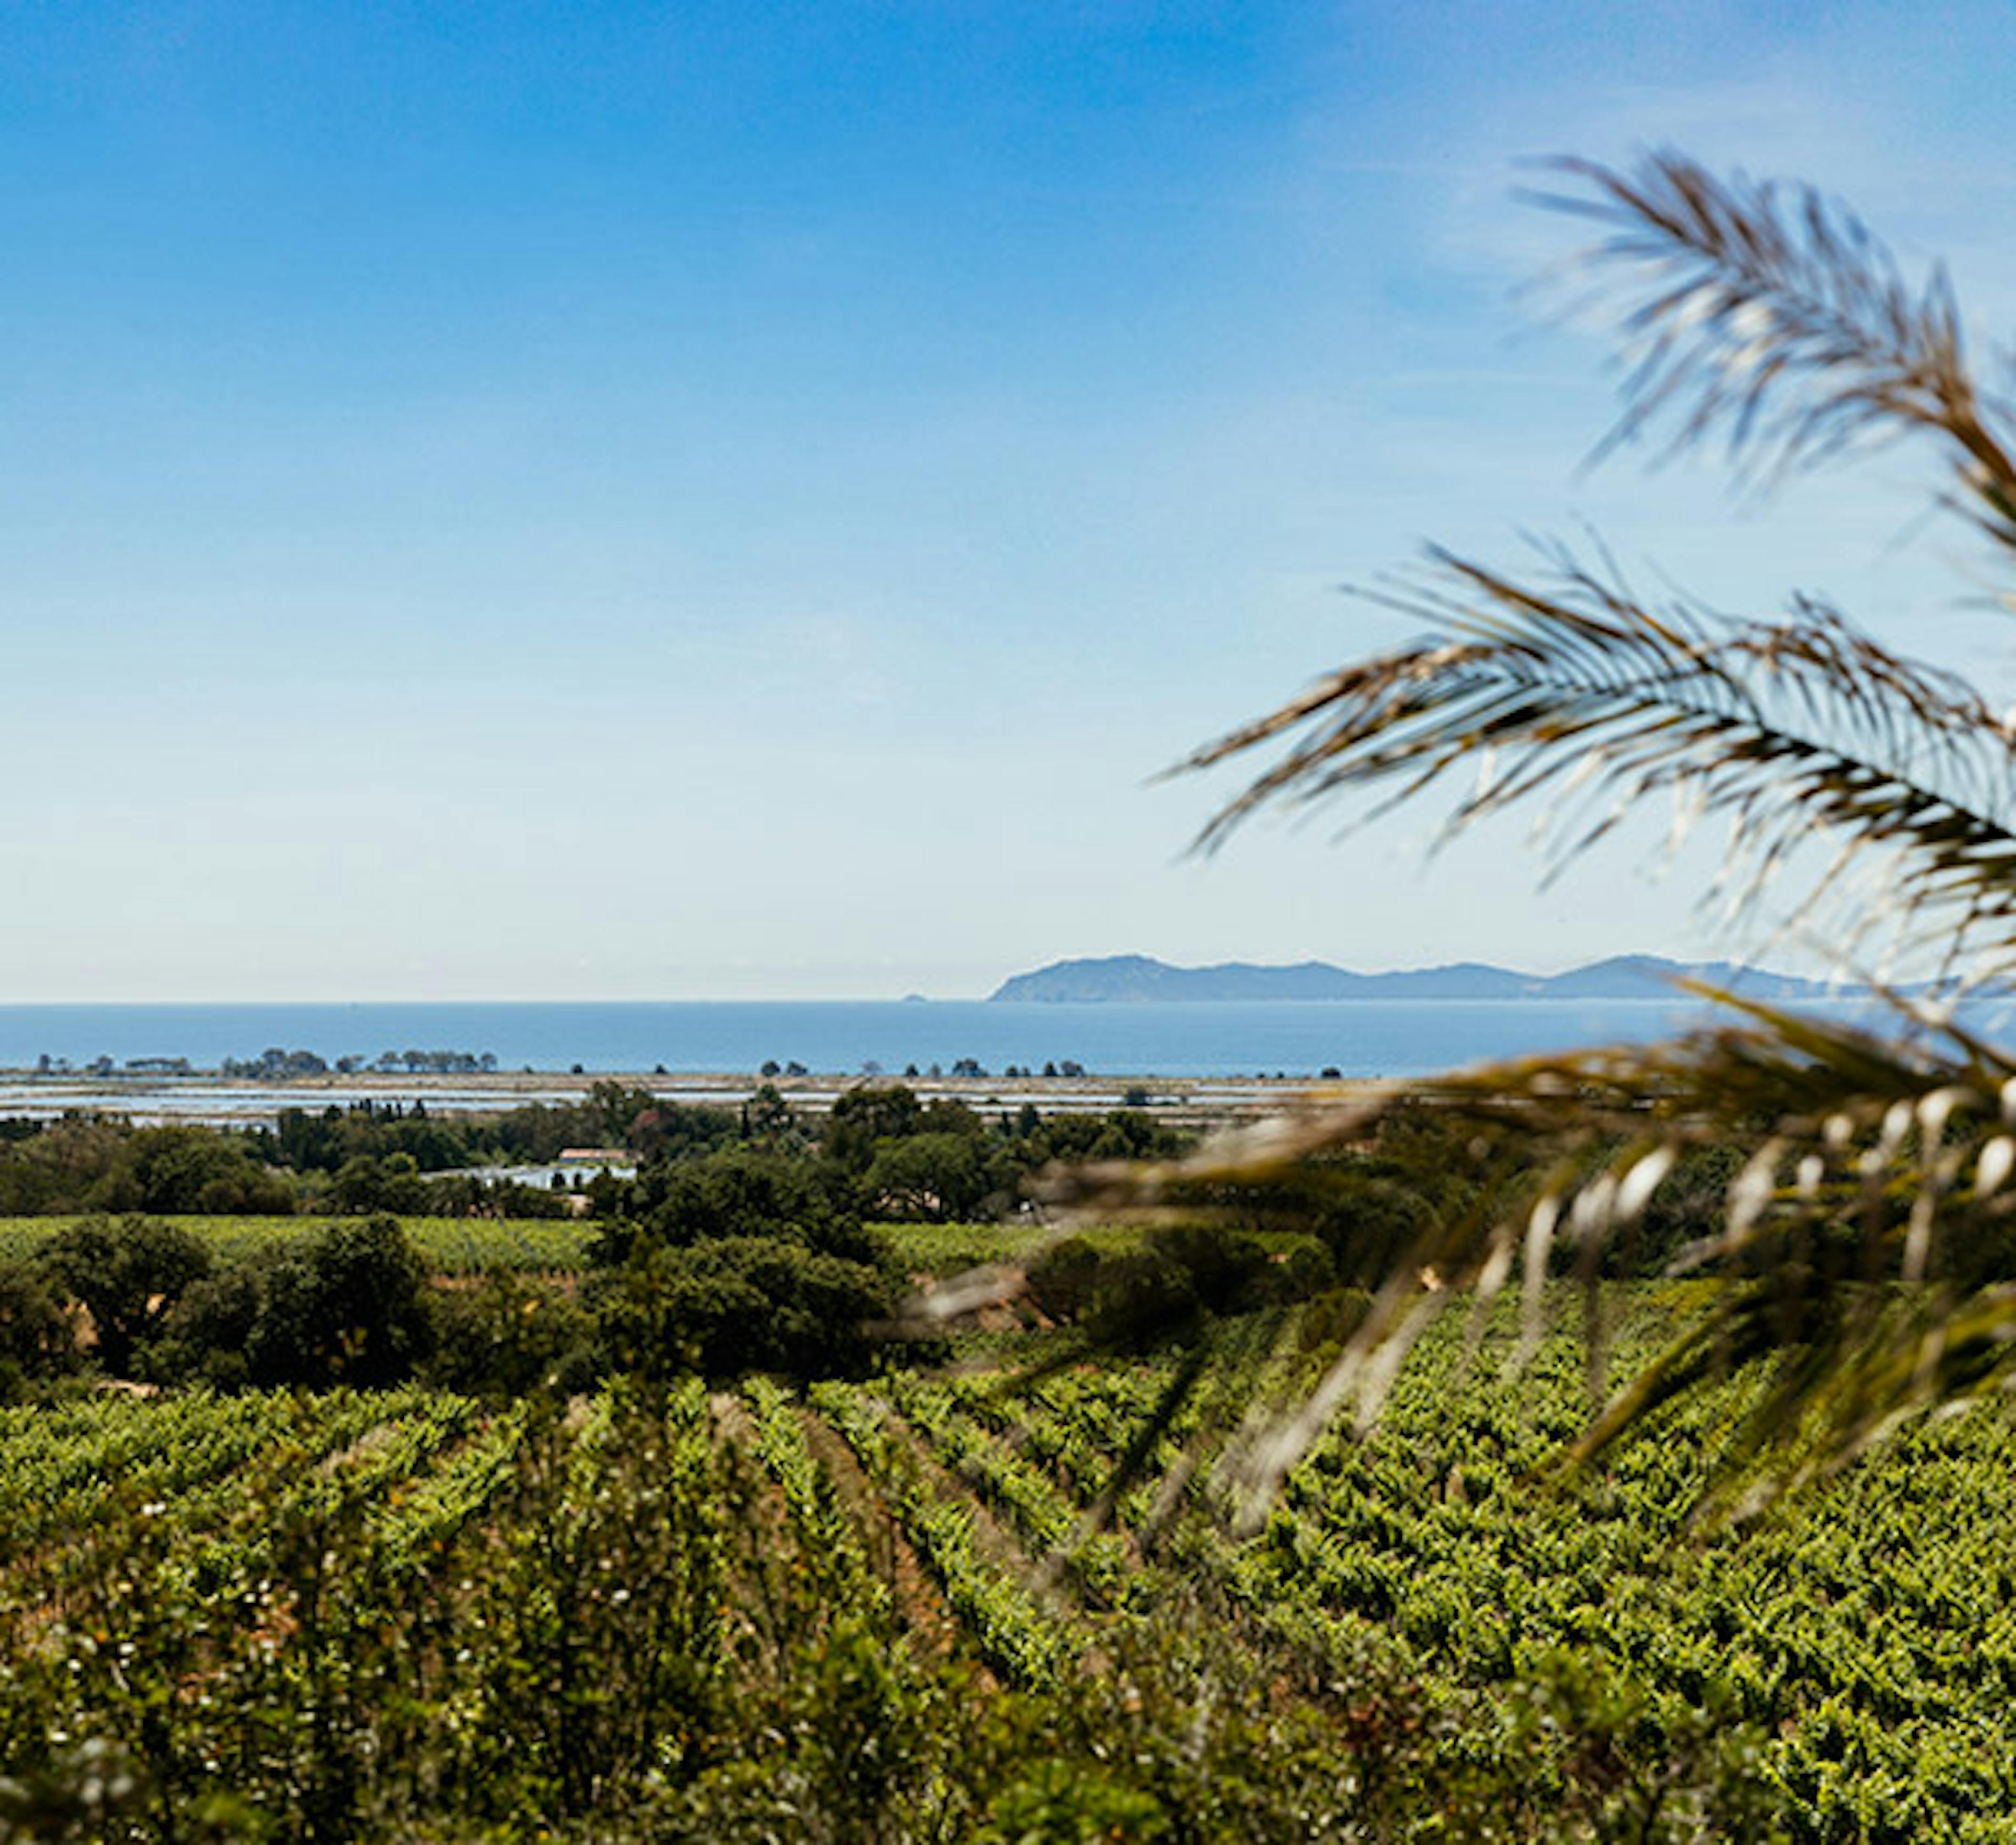 Château Galoupet vineyards and the Golden Isles